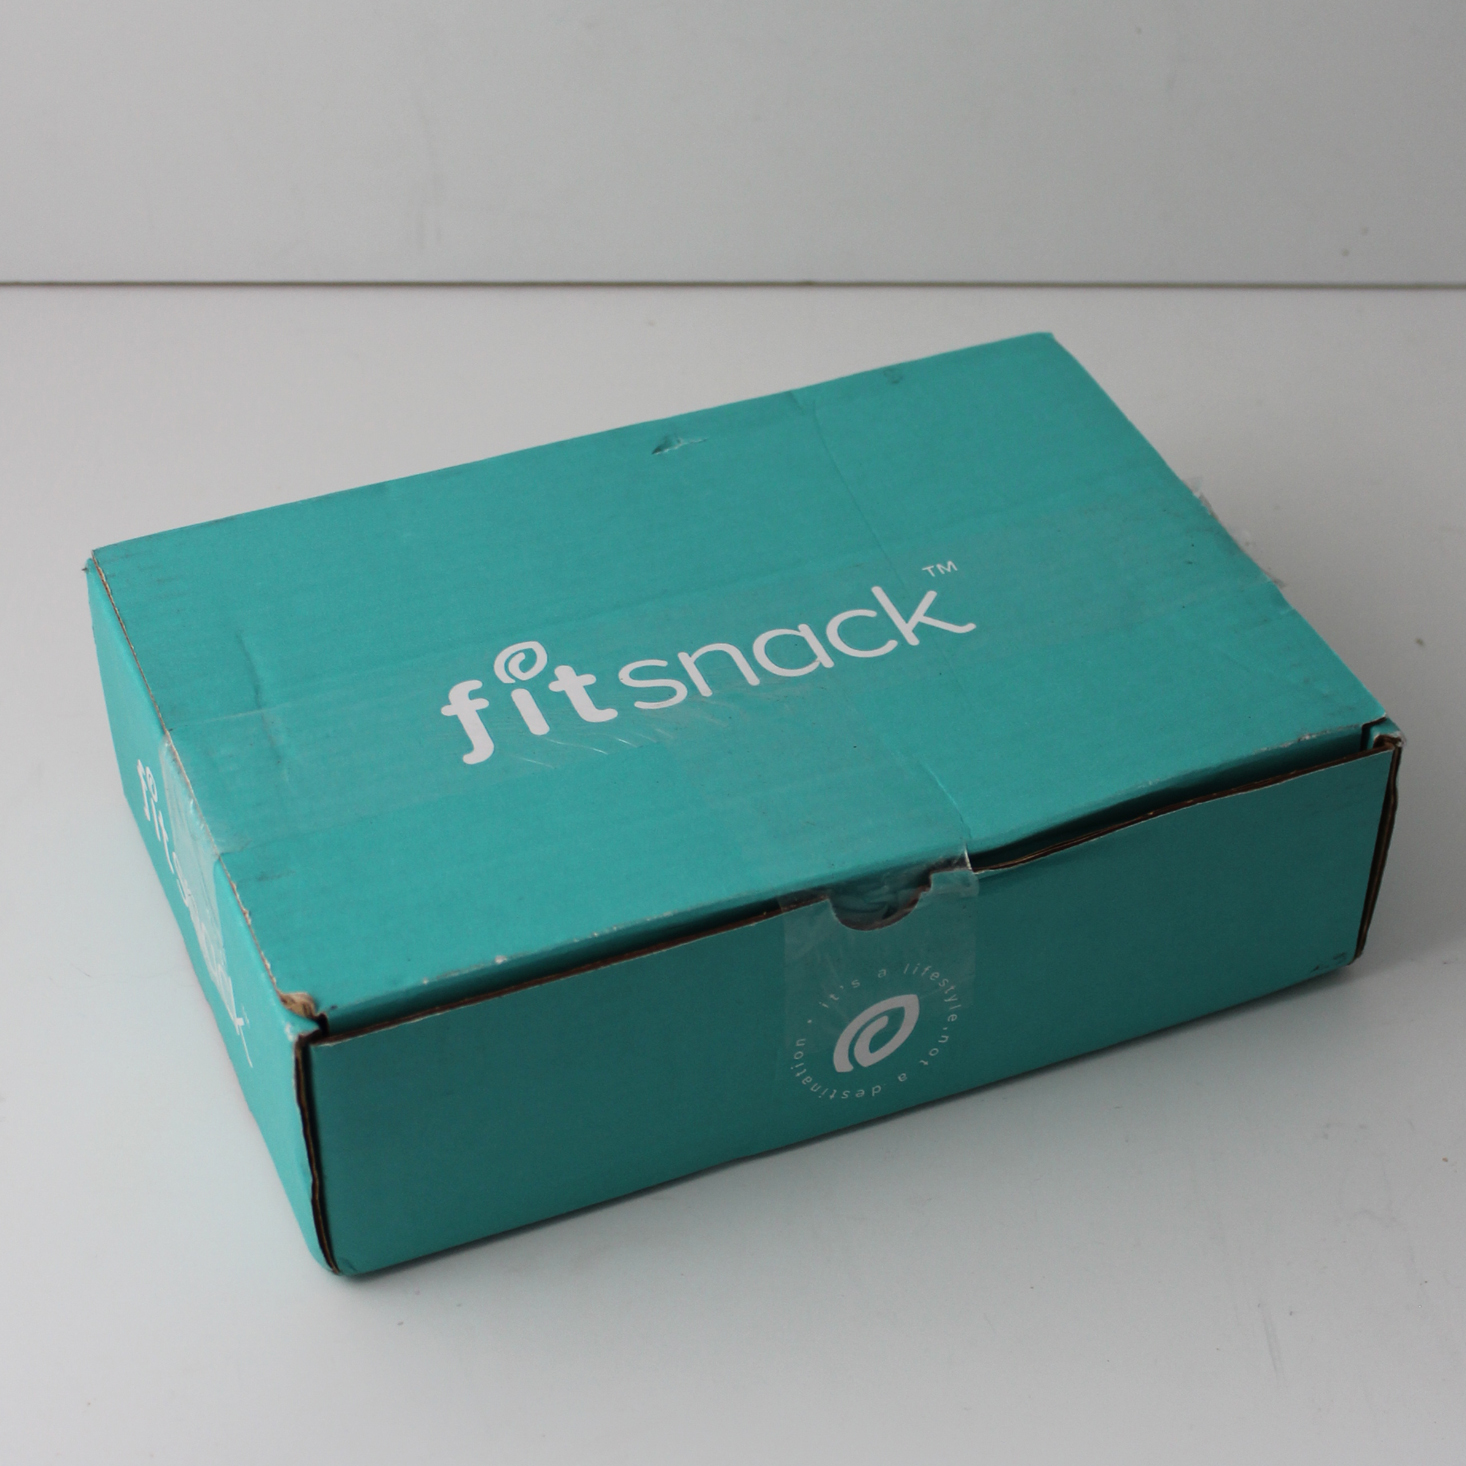 Fit Snack Subscription Box Review – July 2020